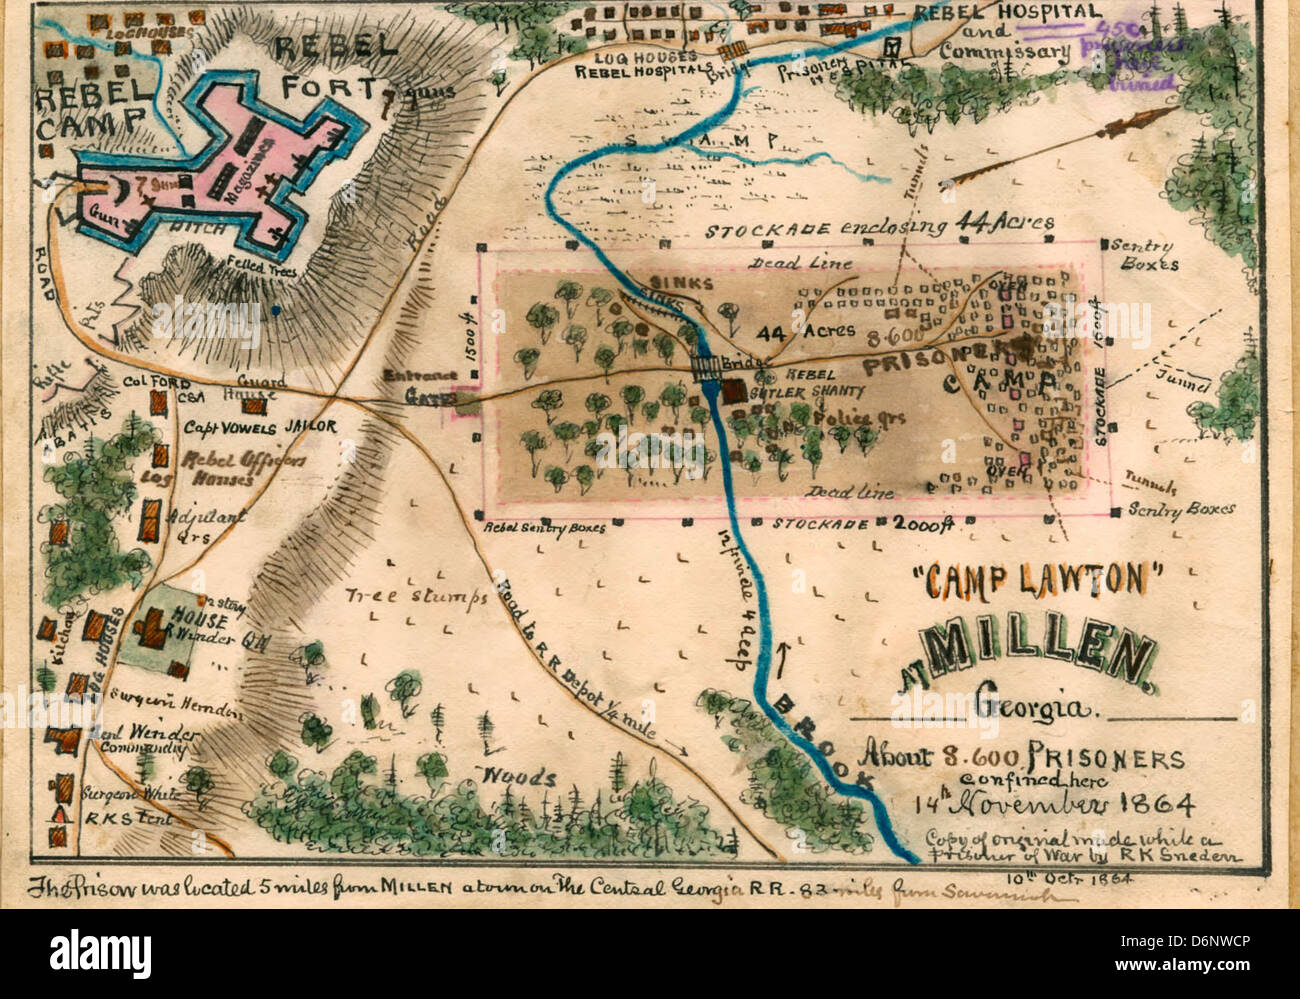 MAP of 'Camp Lawton' at Millen, Georgia : about 8,600 prisoners confined here 14th November 1864 during USA Civil War Stock Photo